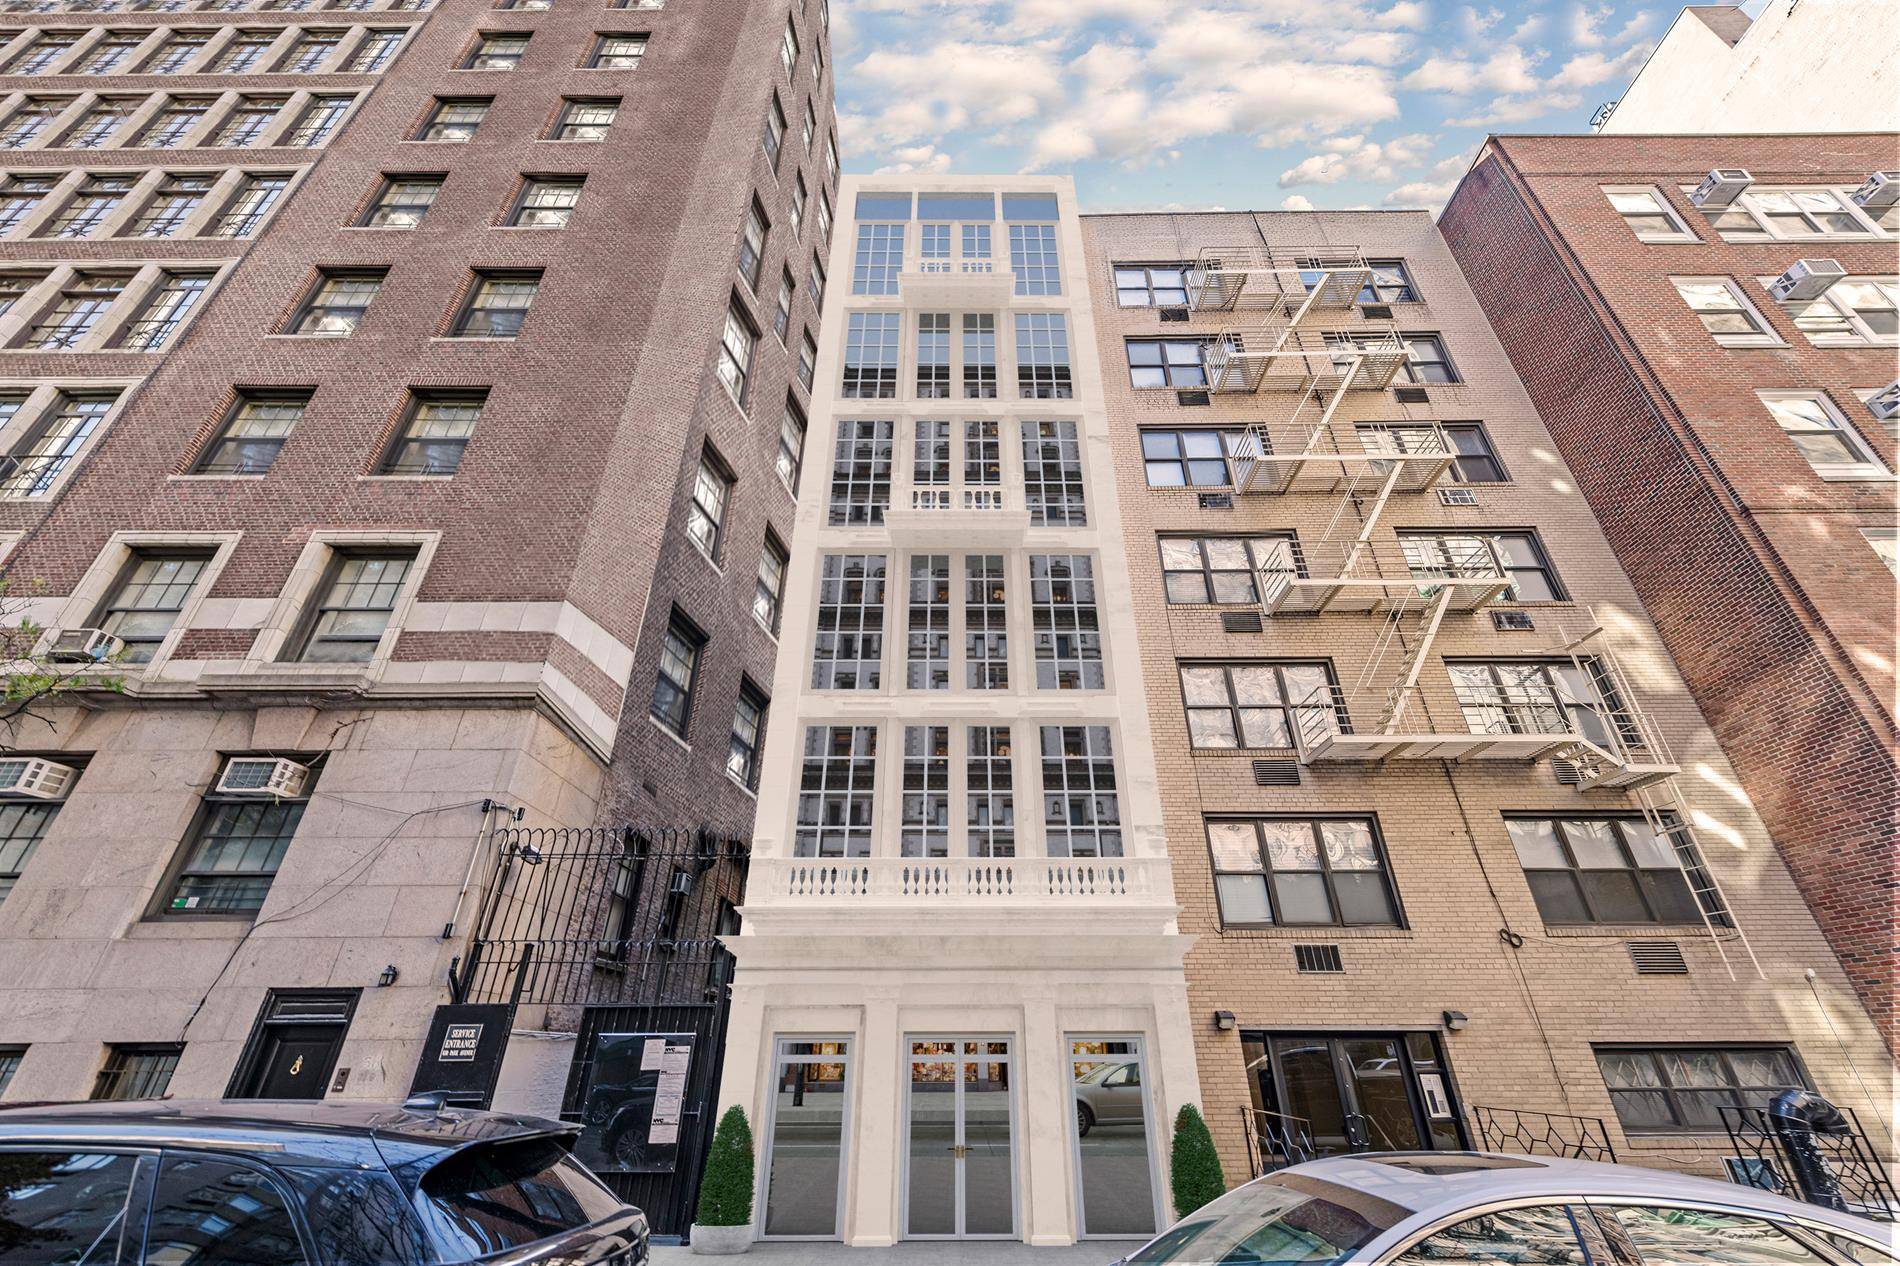 Welcome to 52 East 76th Street Townhouse, Townhouse52, your dream investment opportunity located in the most highly coveted Upper East Side location, steps from The Carlyle Hotel, The Mark Hotel, ...